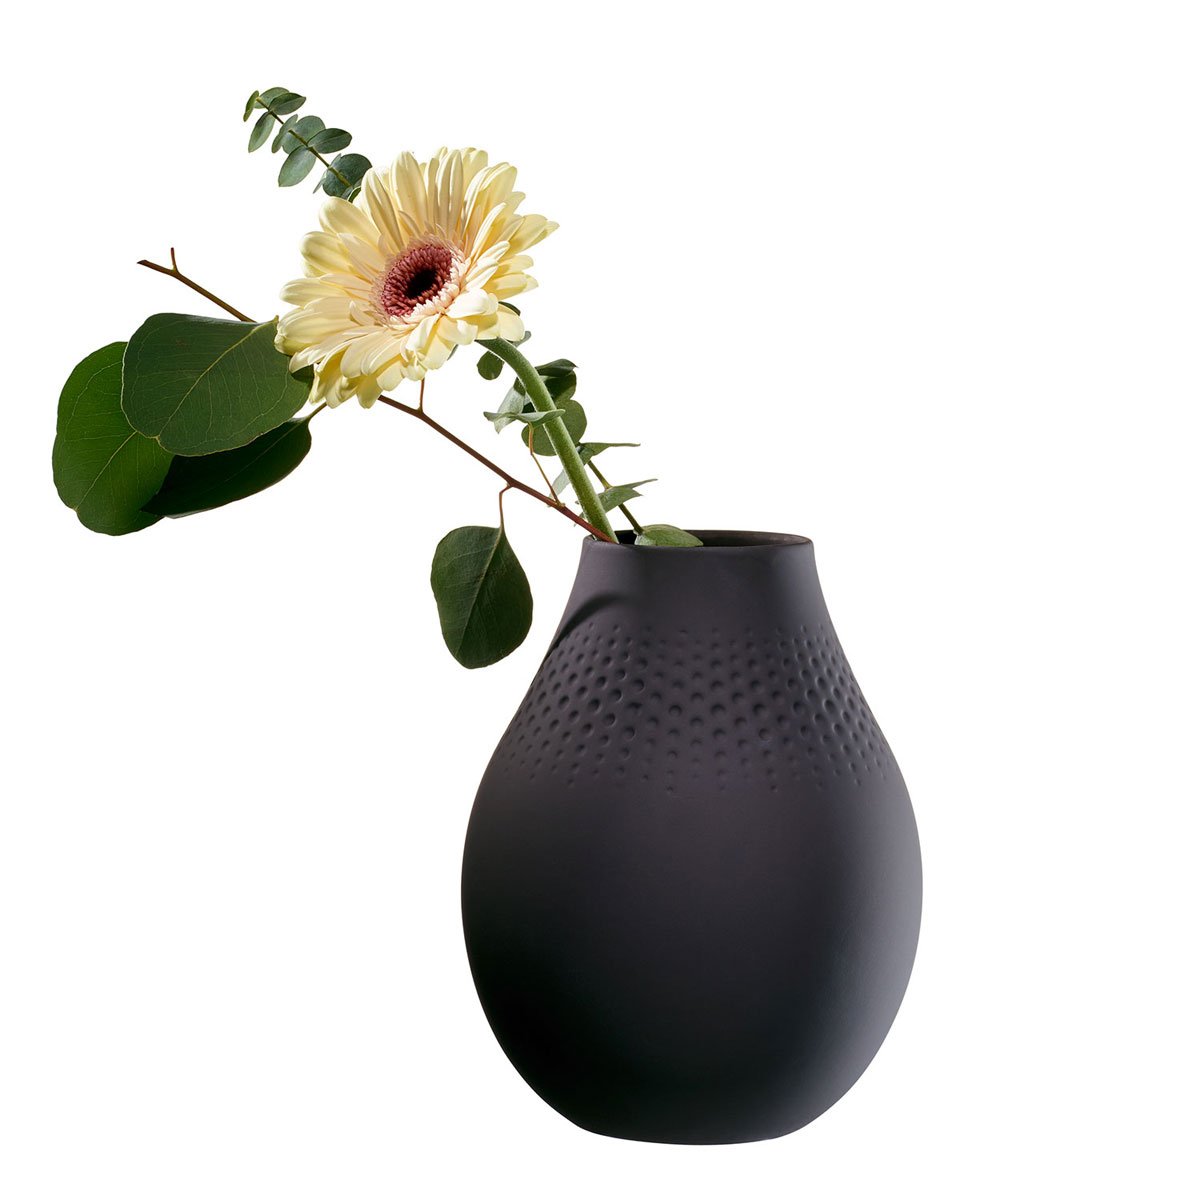 Villeroy and Boch Manufacture Collier Noir Vase Tall Perle